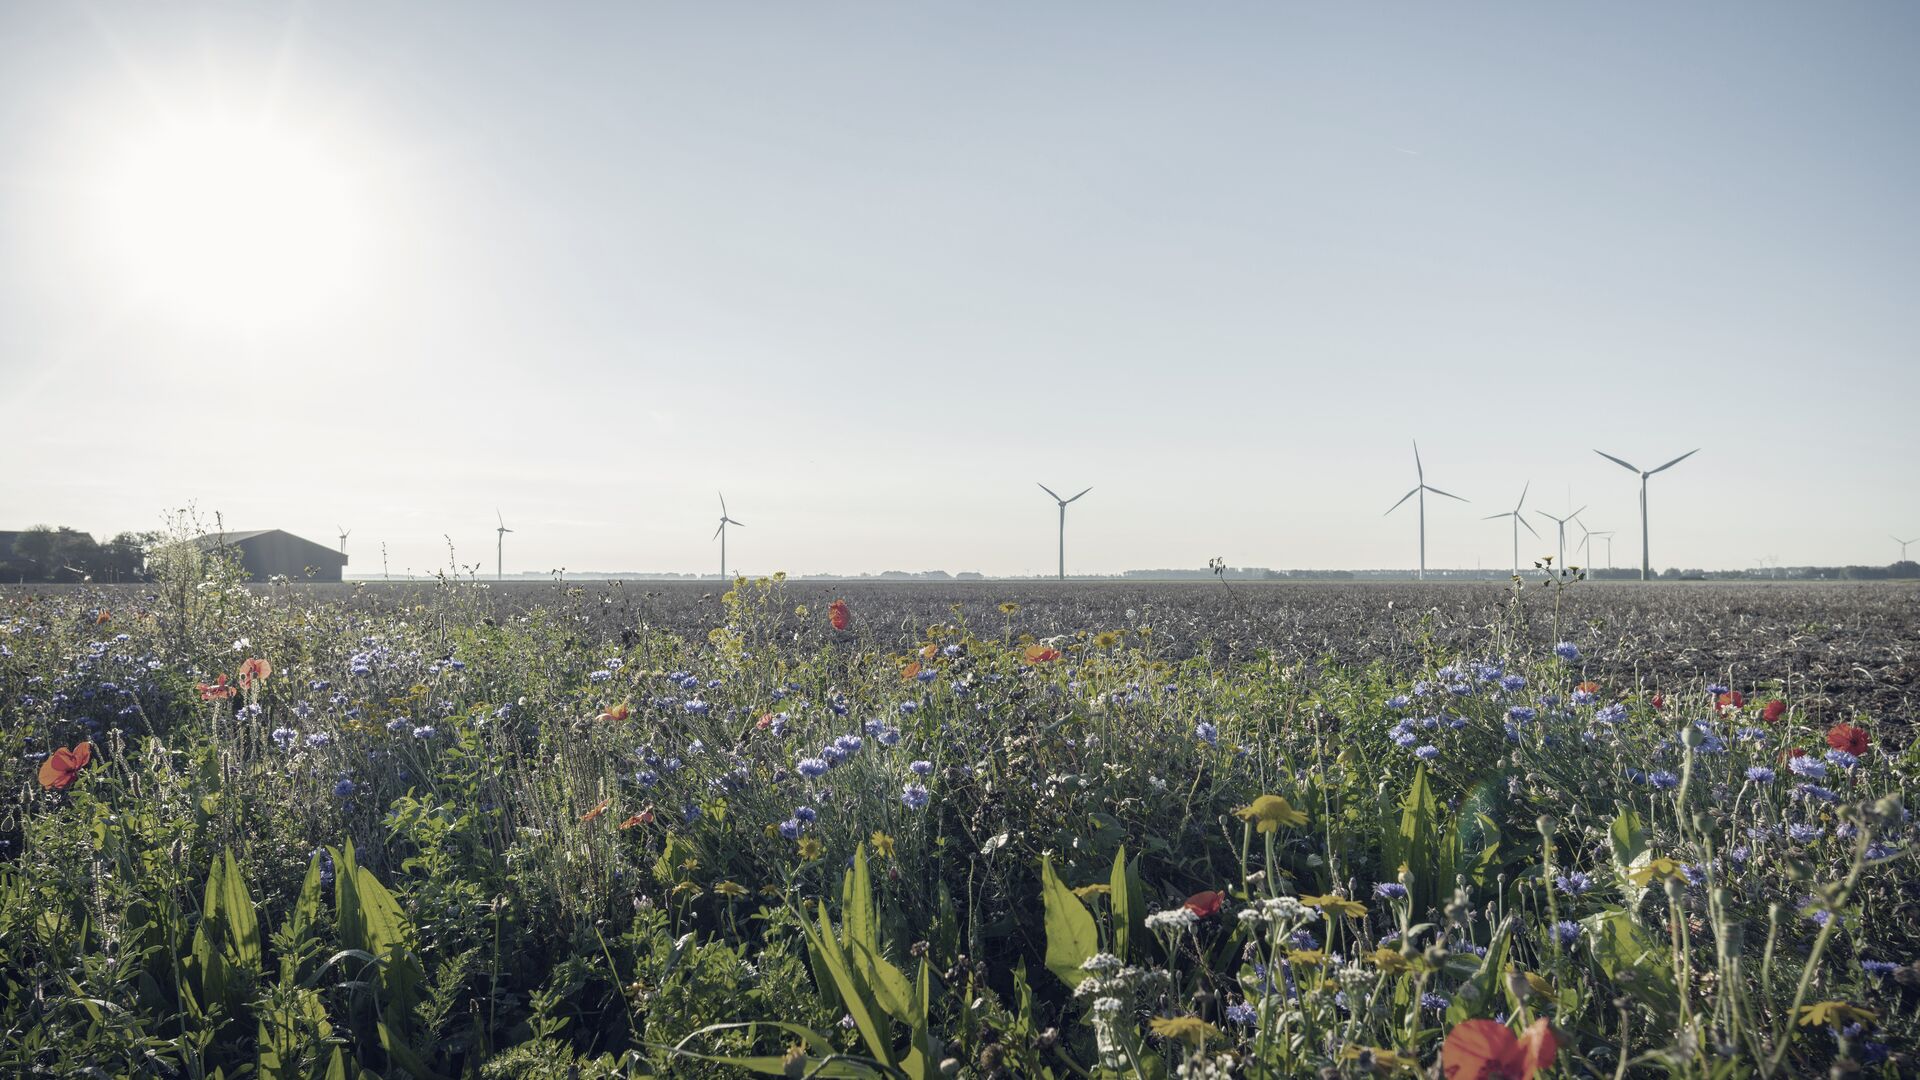 Wild planted flowers along fields and wind turbines in the back